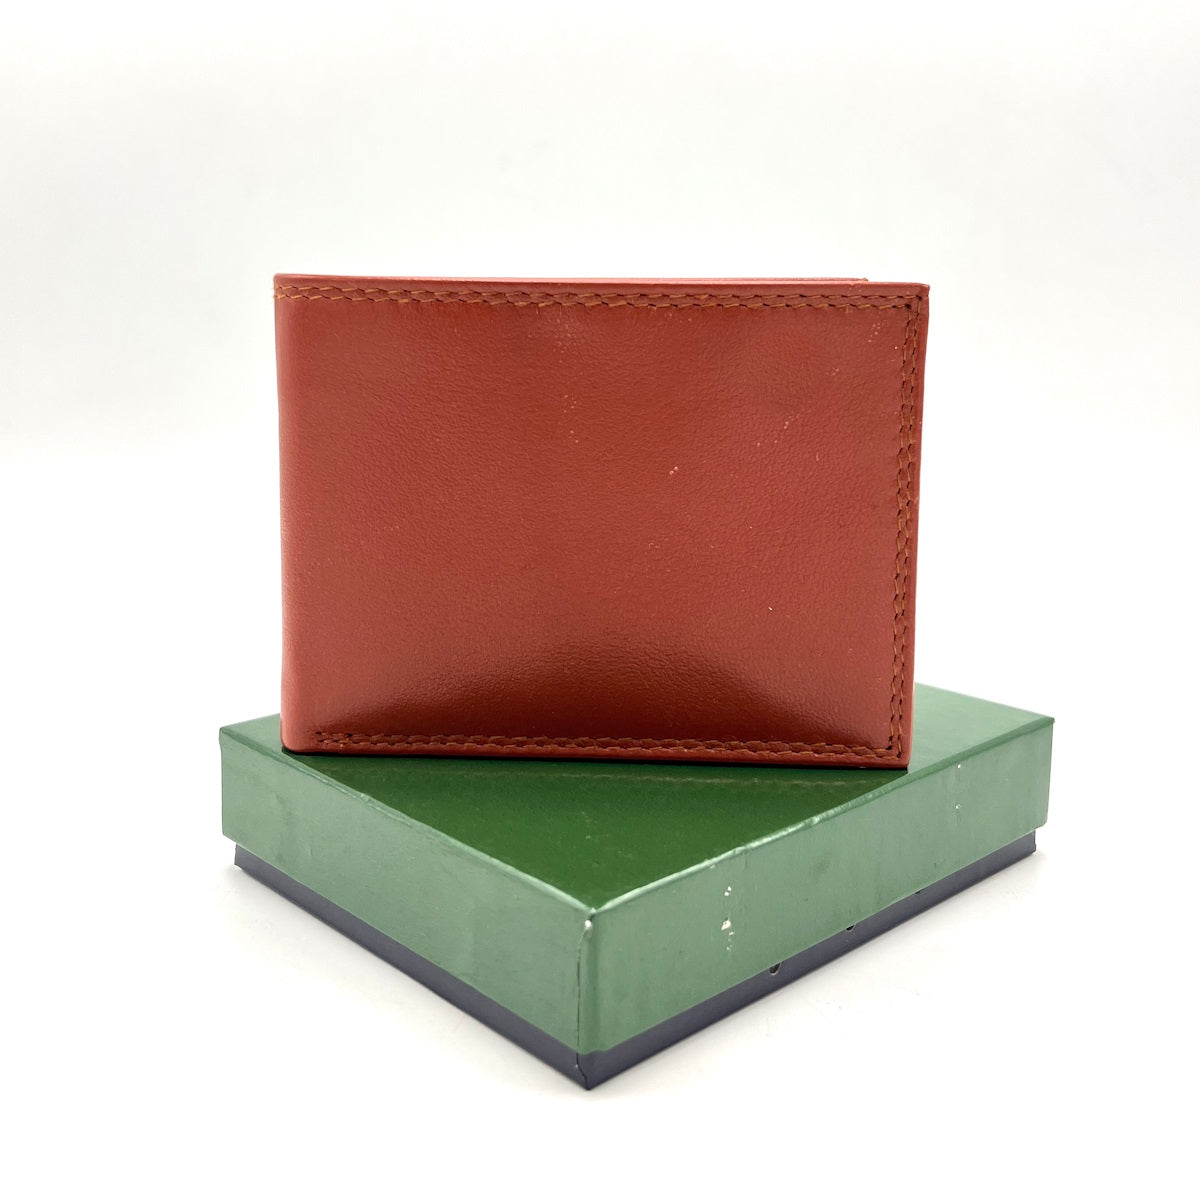 Small genuine leather wallet, for women, art. 112.422